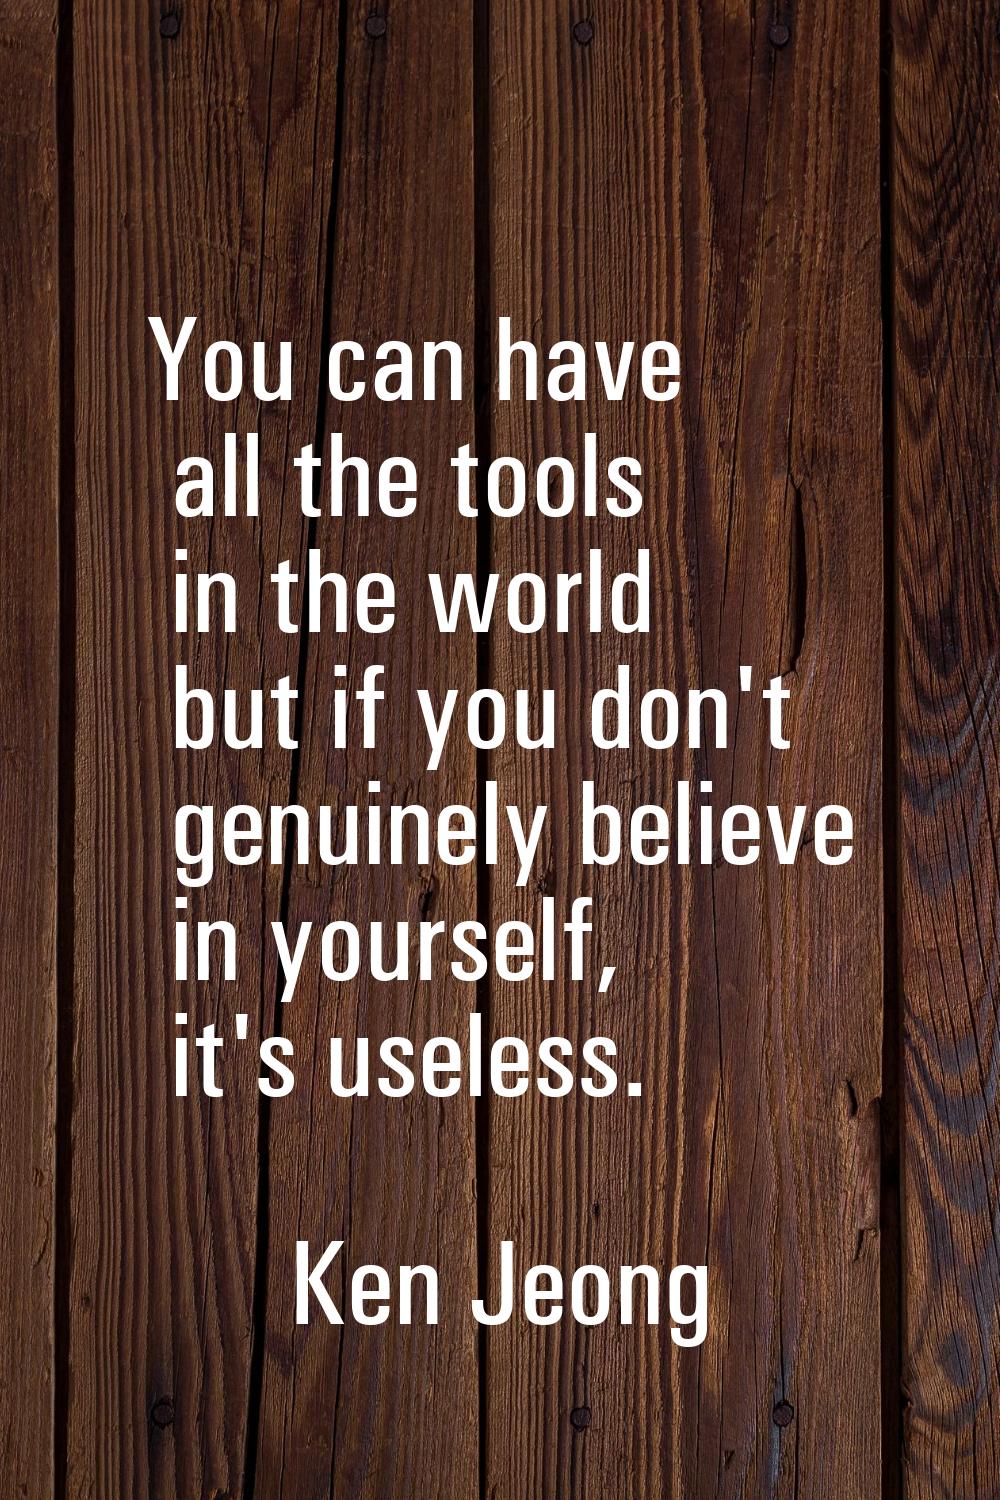 You can have all the tools in the world but if you don't genuinely believe in yourself, it's useles